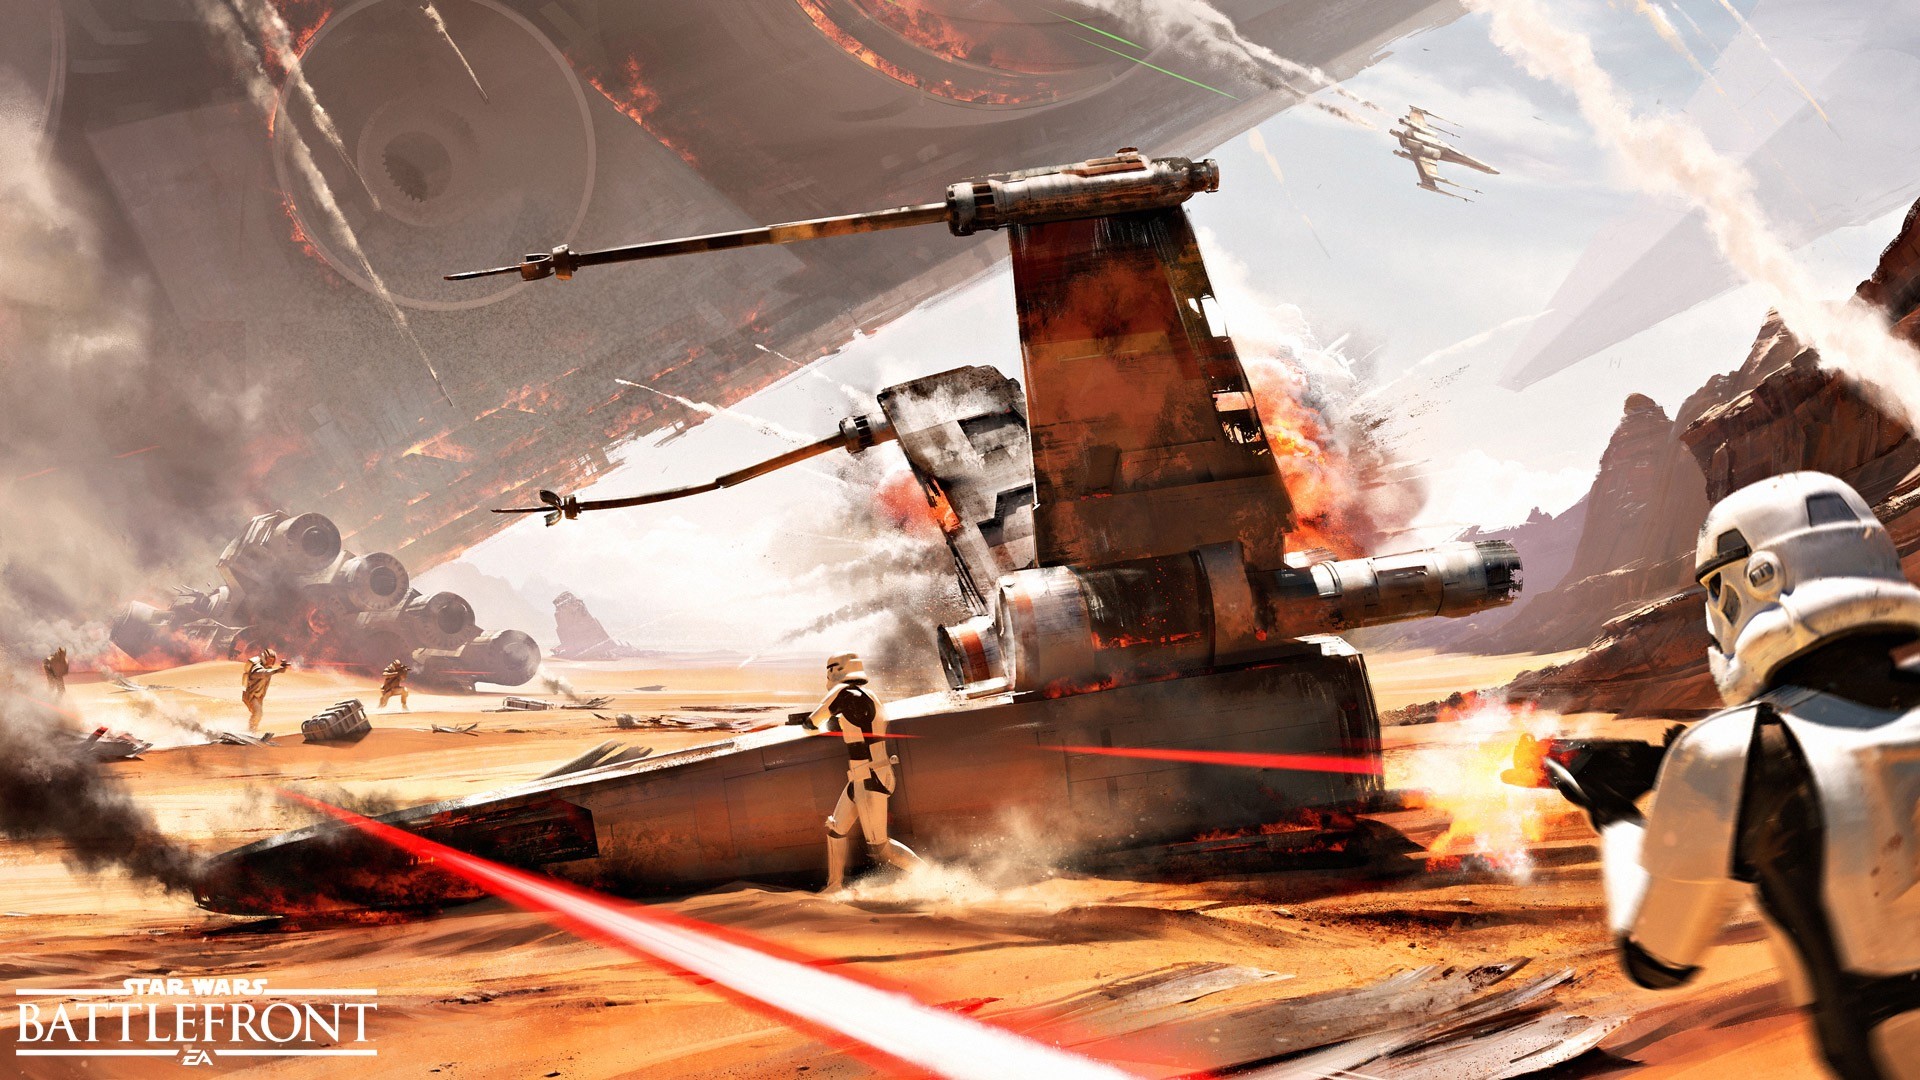 General 1920x1080 Star Wars Star Wars: Battlefront video games X-wing stormtrooper war spaceship wreck Electronic Arts EA DICE Imperial Forces PC gaming